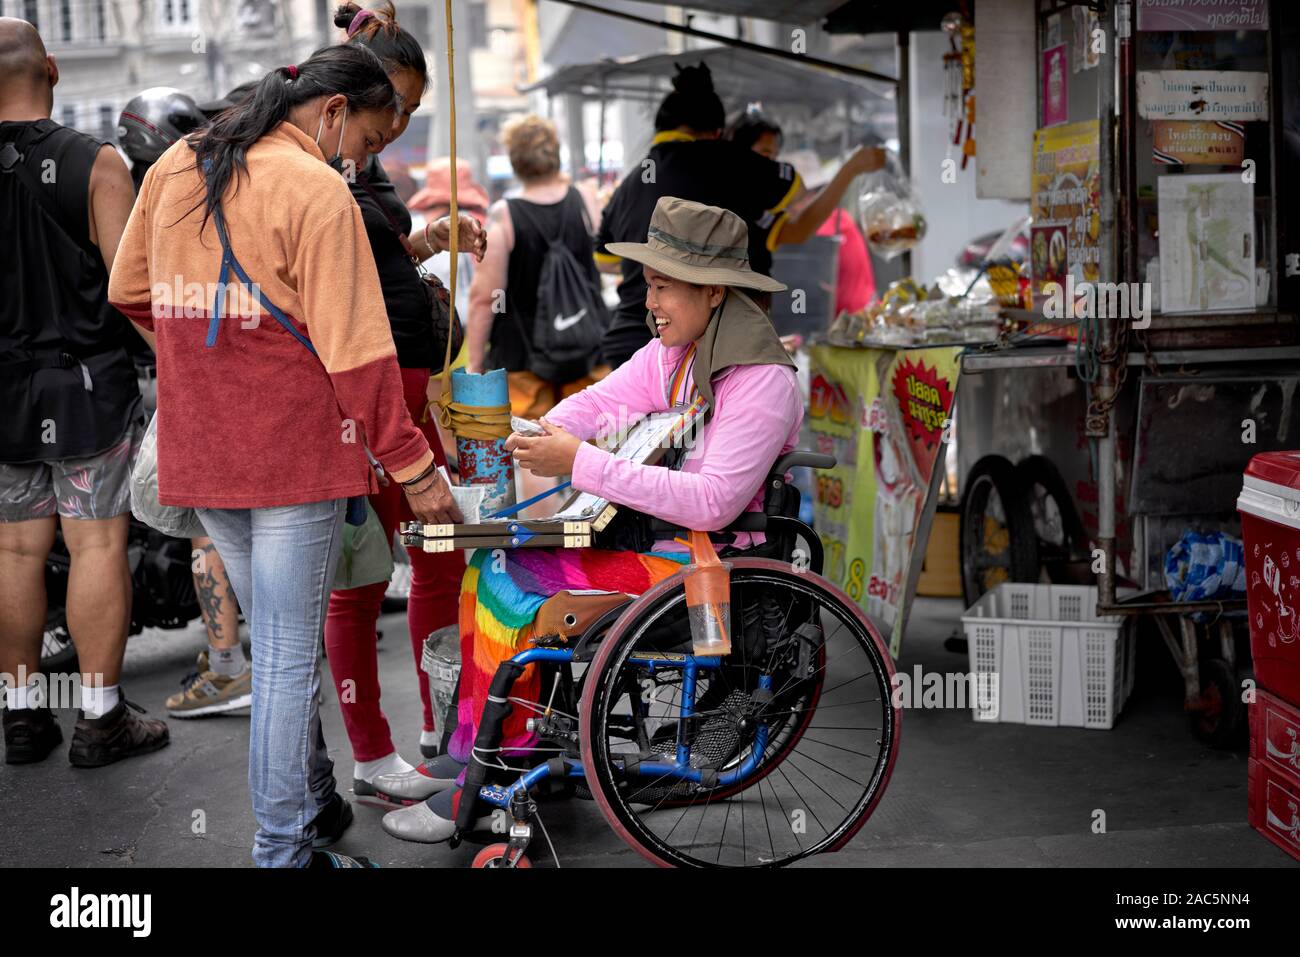 Disabled Woman In A Wheelchair Selling Lottery Tickets On A